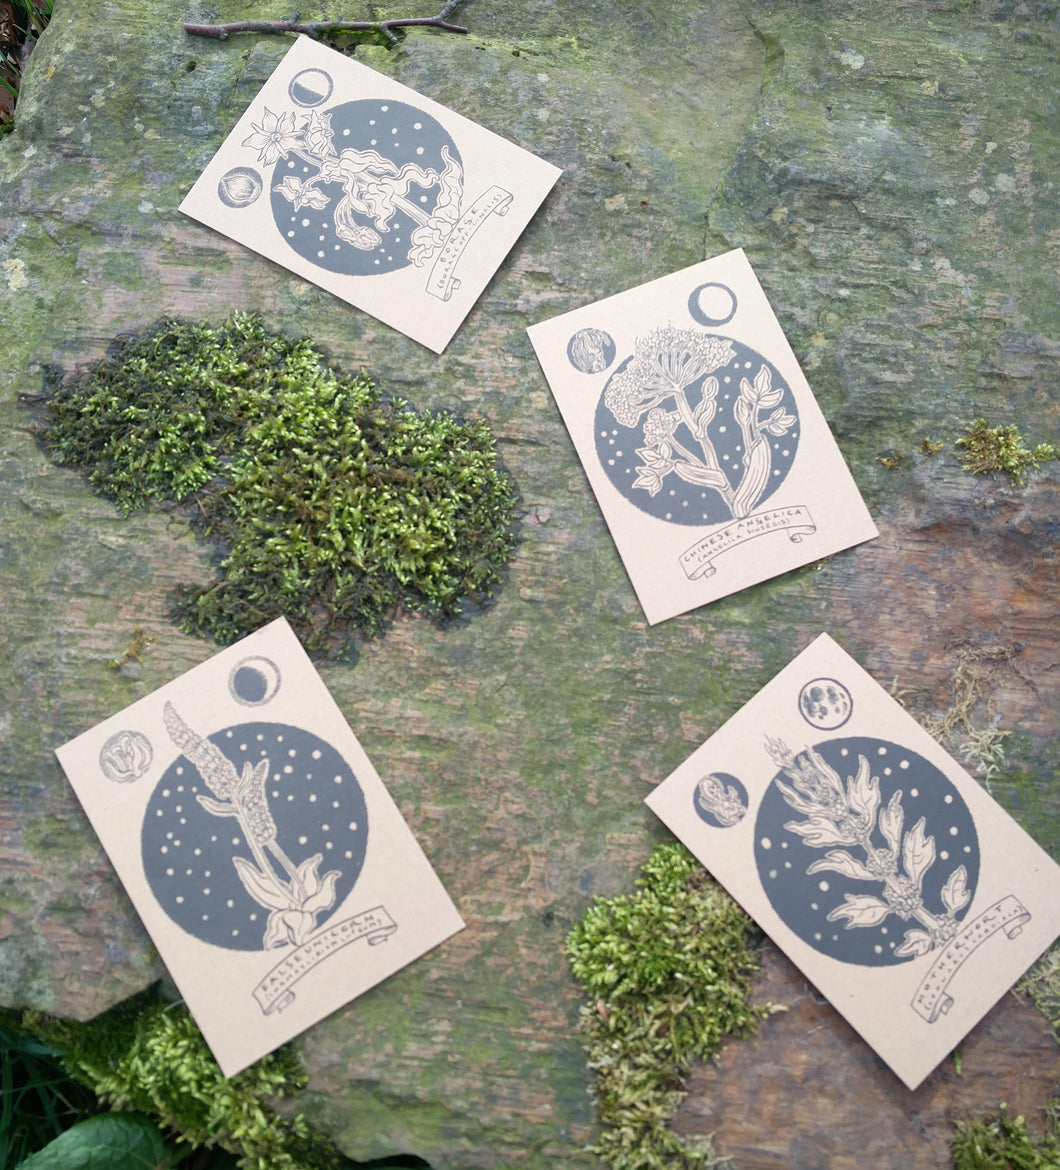 Illustrated herb cards